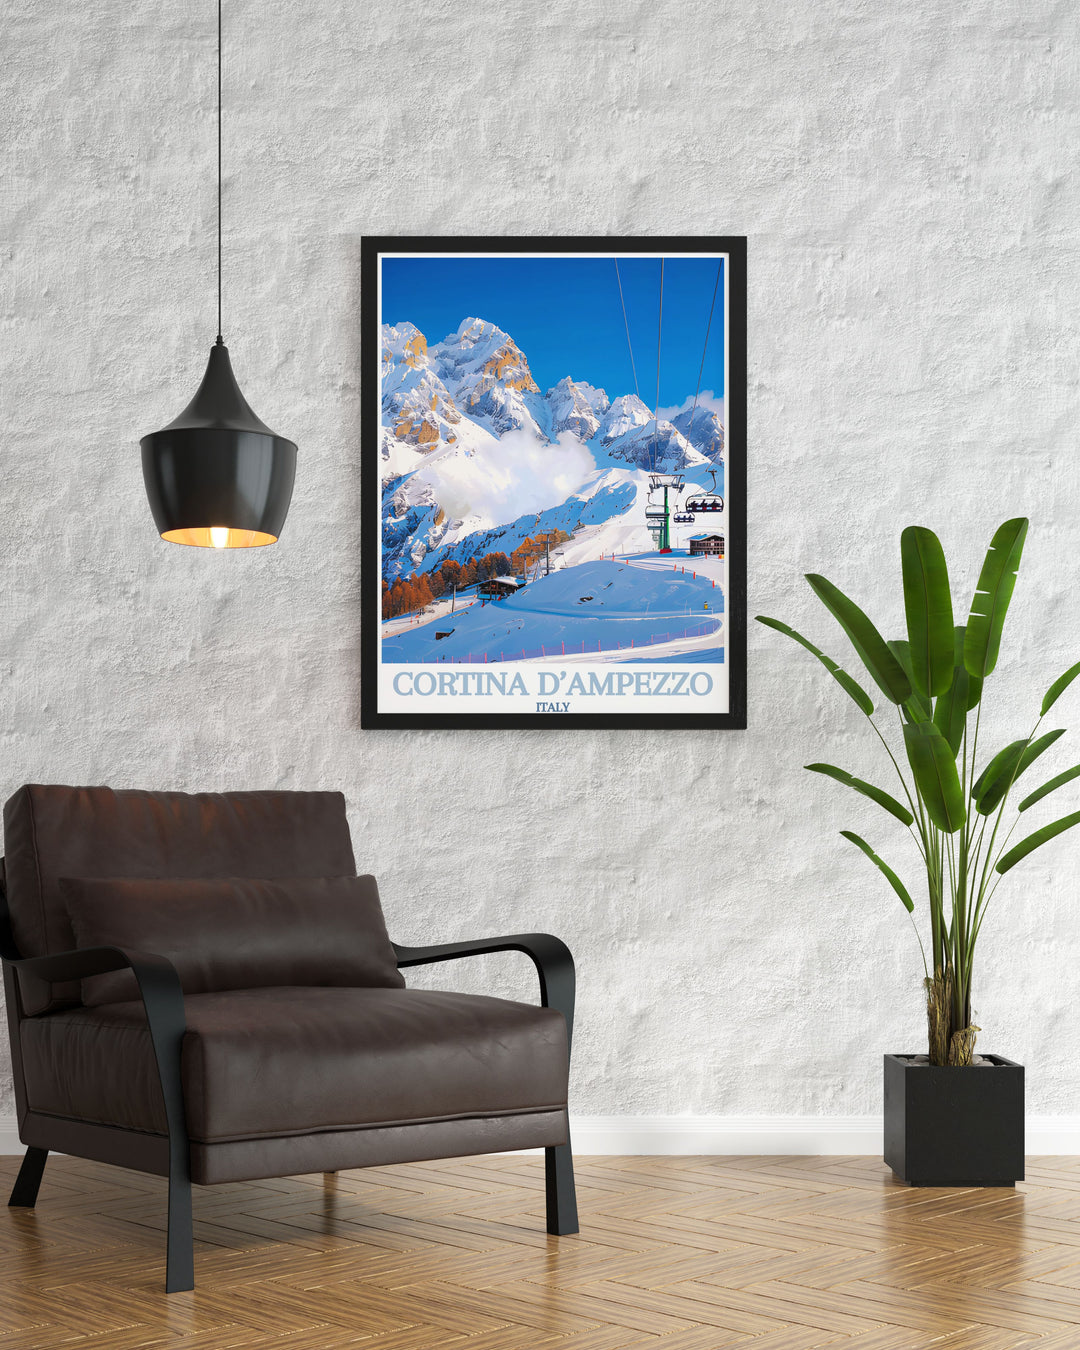 Experience the adventure of Cortina dAmpezzo with our travel posters. Ideal for outdoor enthusiasts and travel lovers, these prints feature the diverse activities available in the region, from skiing to hiking, making them a great addition to your home decor.